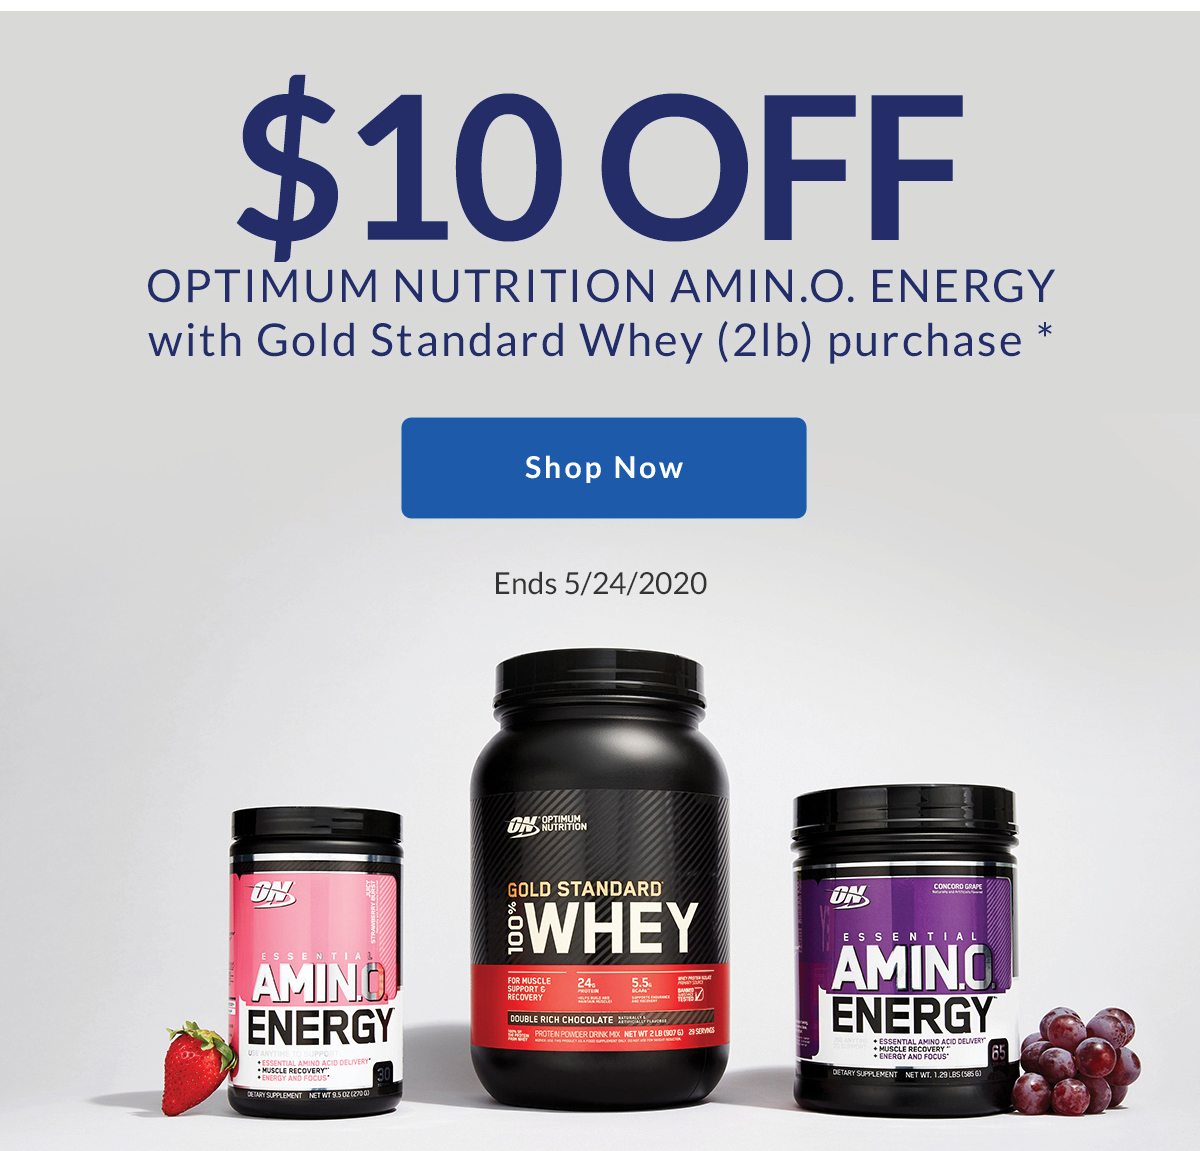 $10 off Amino Energy w/ purchase of 2lb GSW